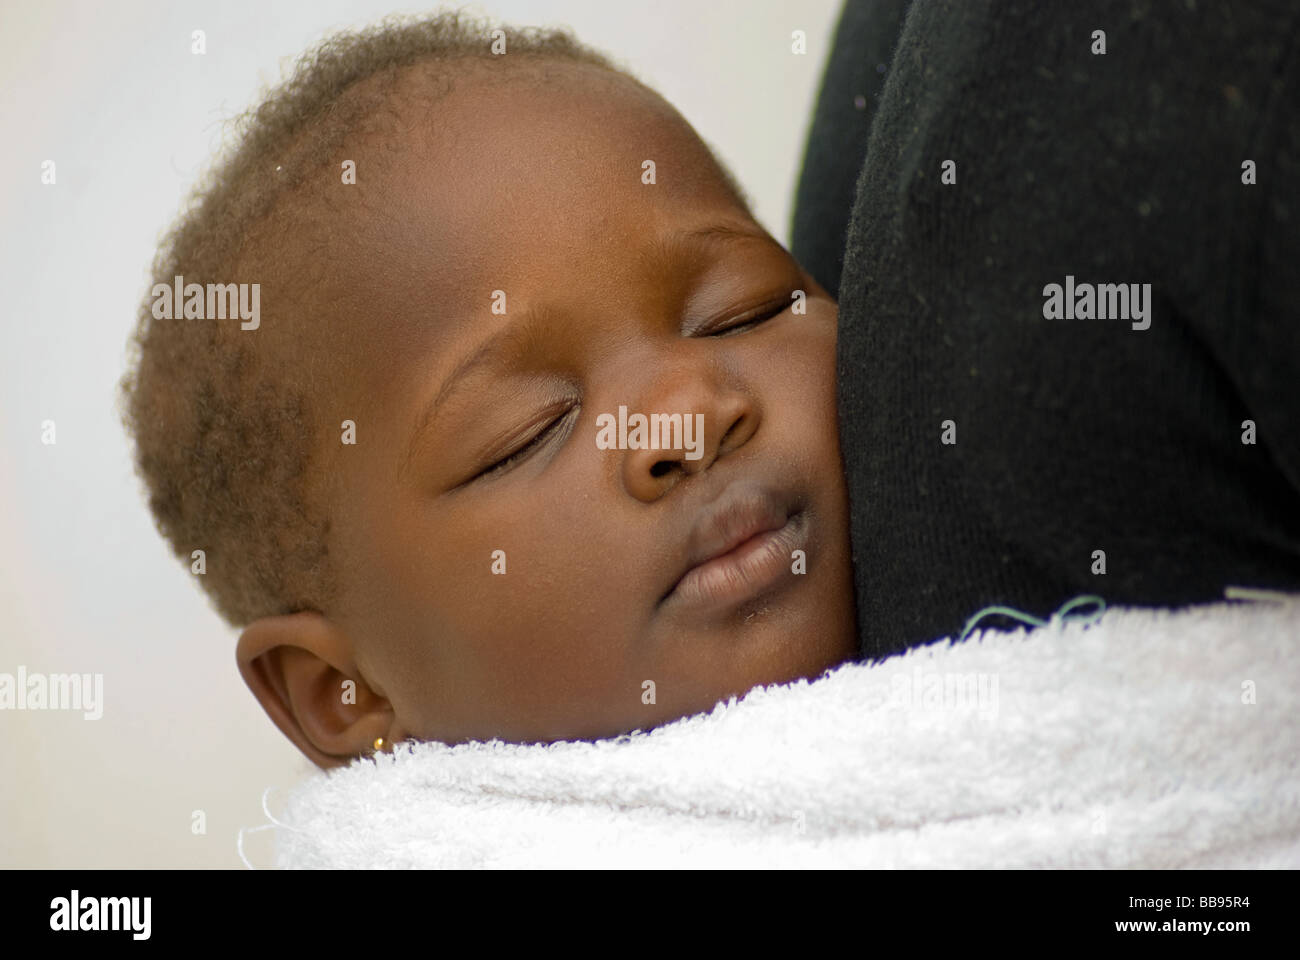 Portrait of a sleeping Zimbabwean baby carried on his mother's back. Stock Photo